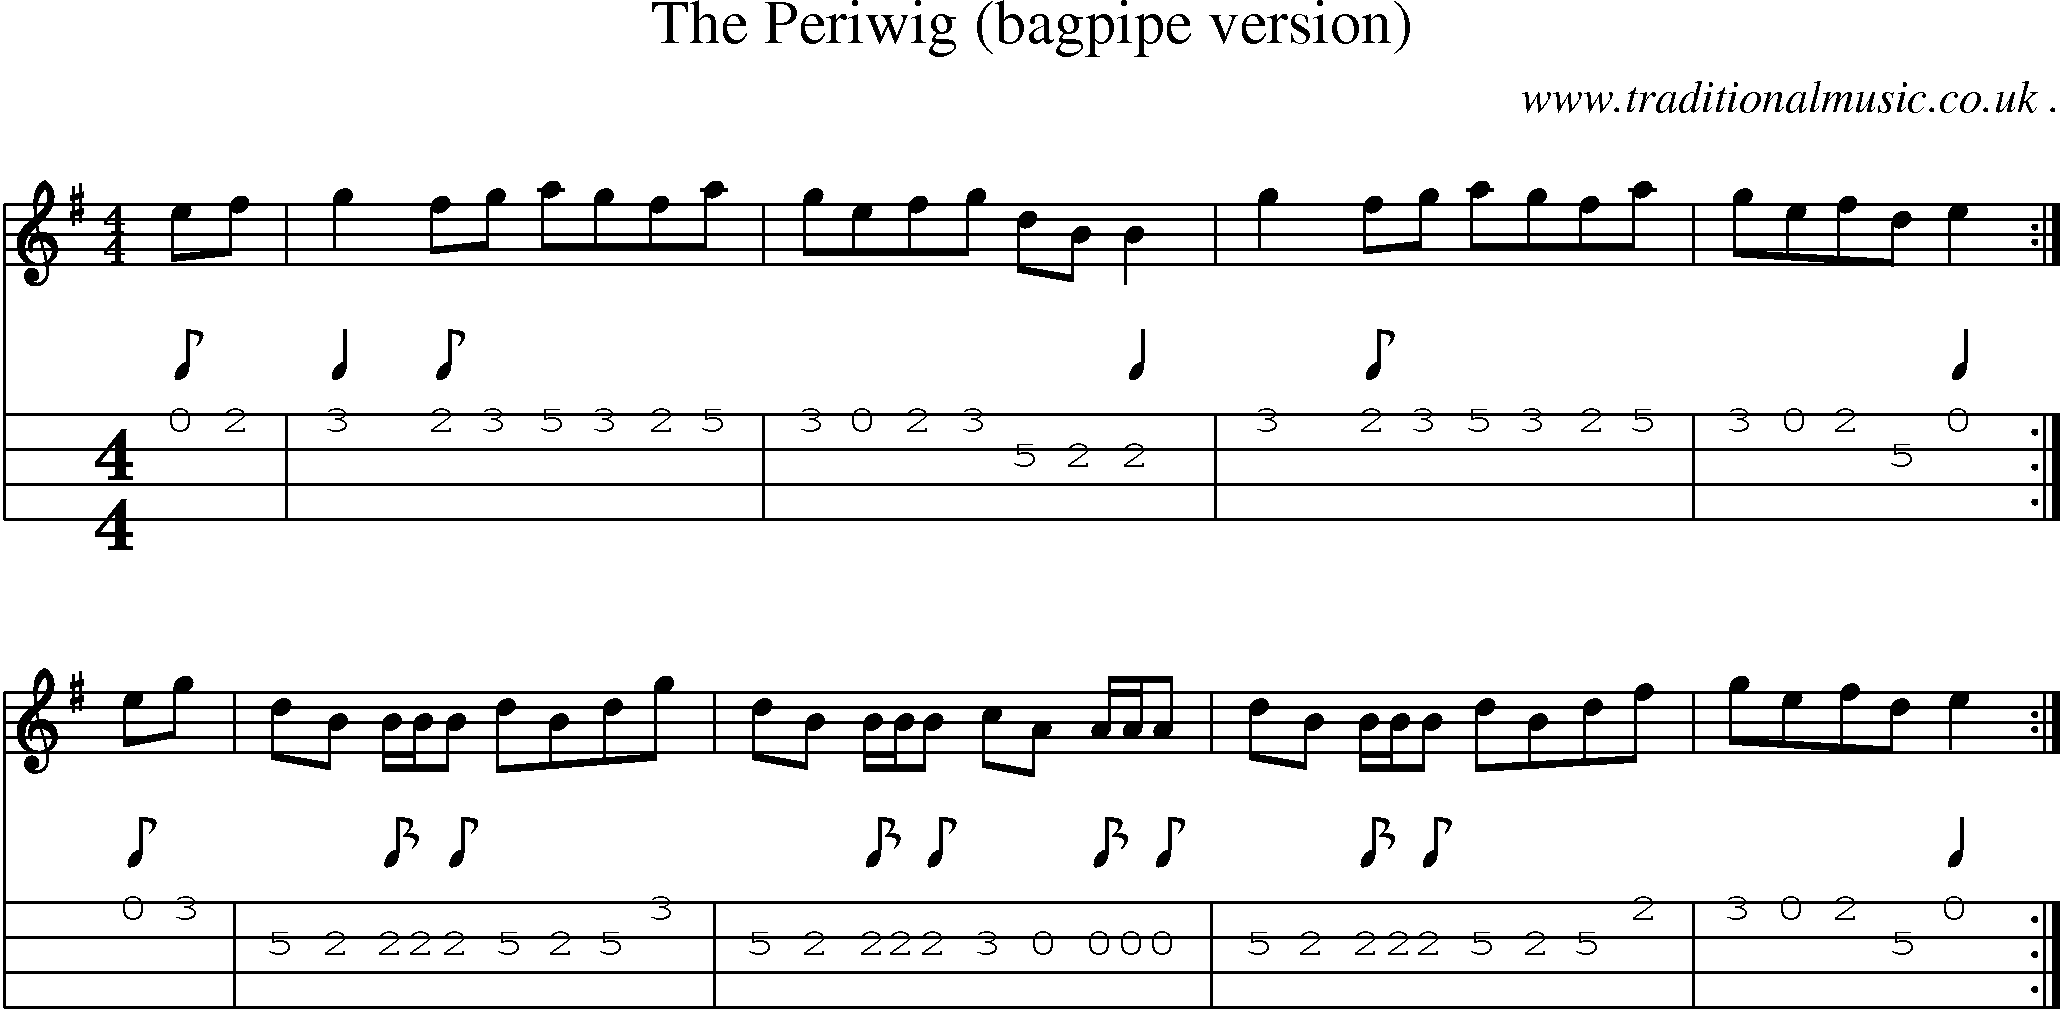 Sheet-music  score, Chords and Mandolin Tabs for The Periwig Bagpipe Version